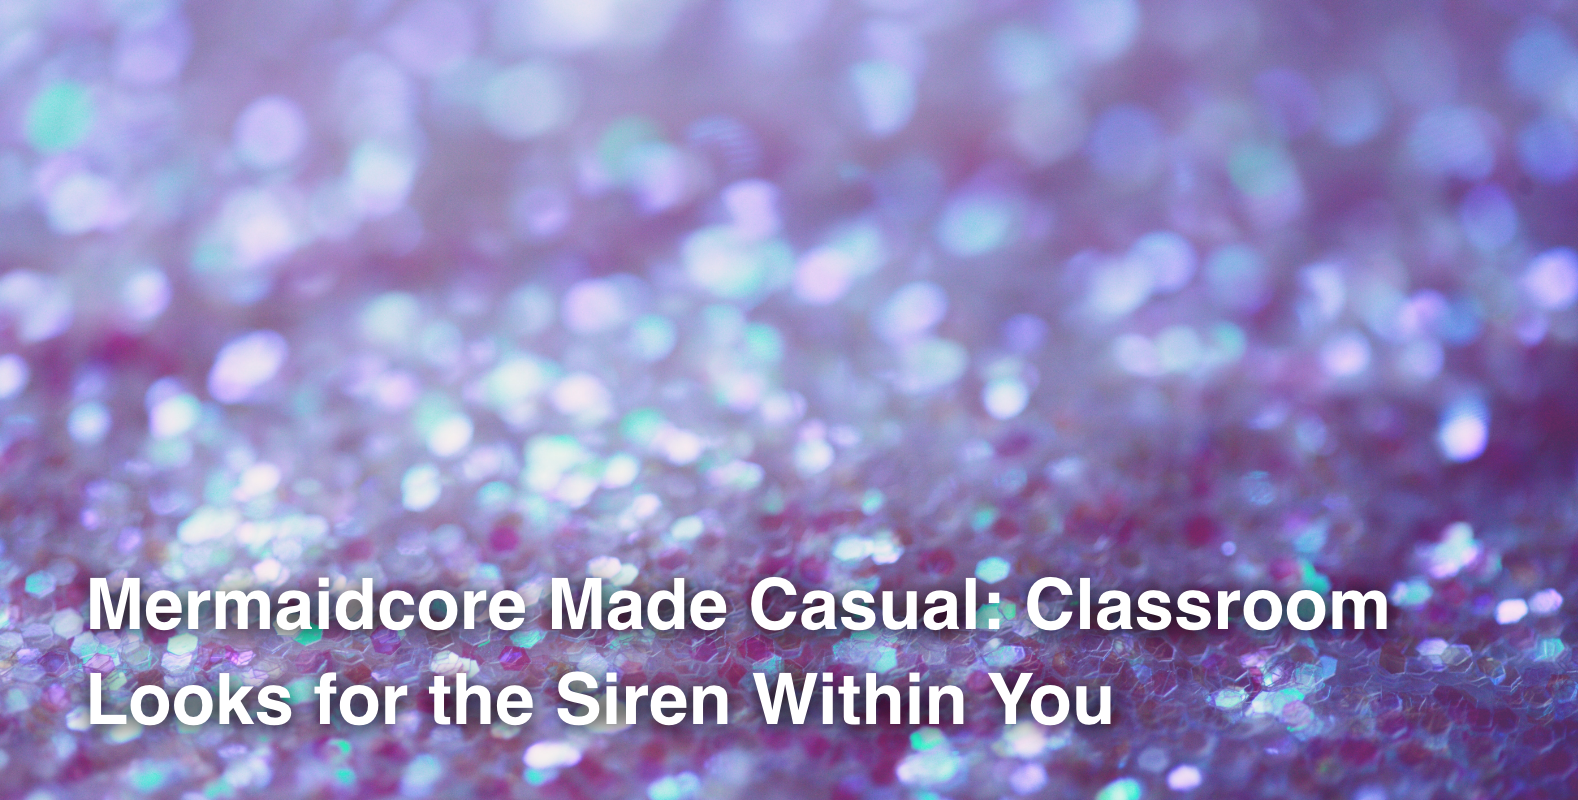 Mermaidcore Made Casual: Classroom Looks for the Siren Within You